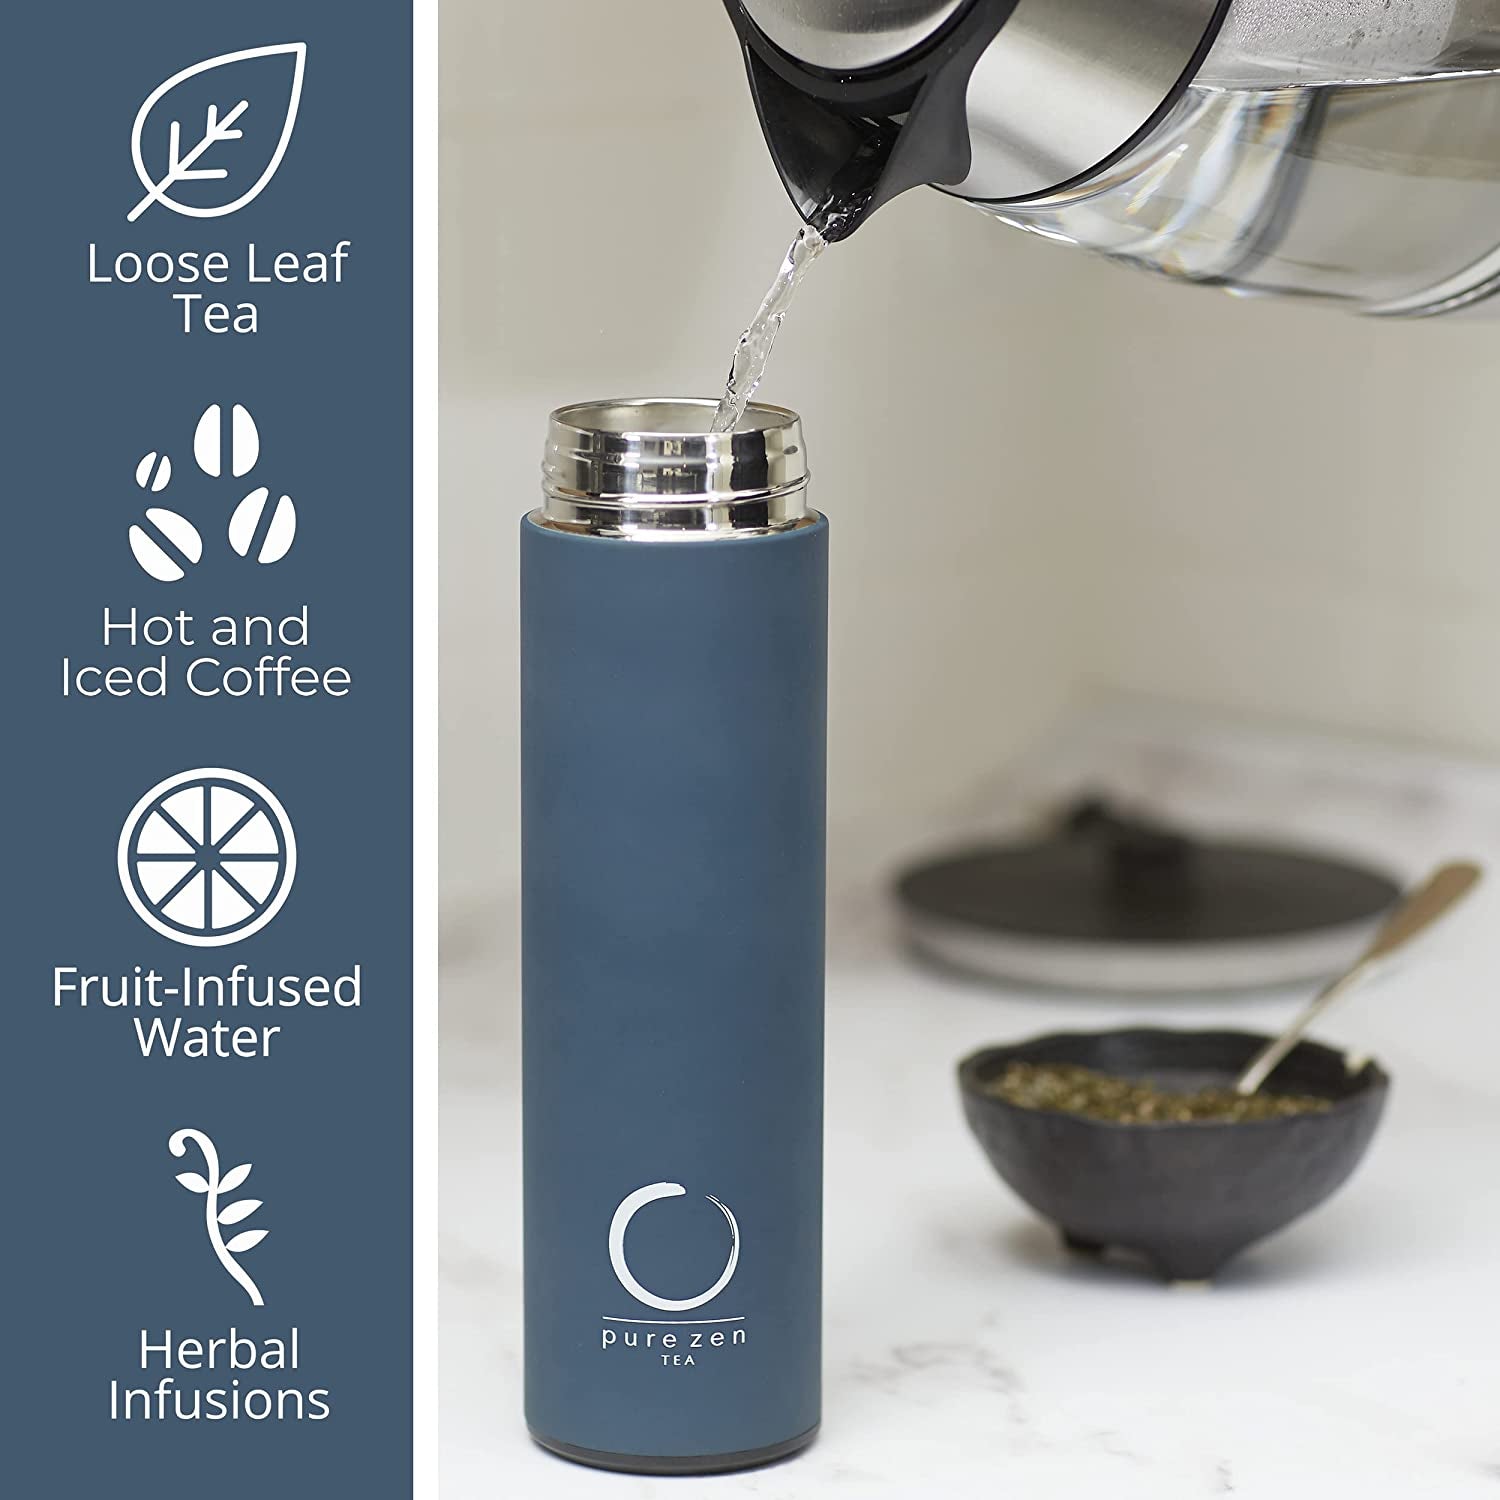 Thermos with Infuser - Stainless Steel Insulated Tea Infuser Tumbler for Loose Leaf Tea, Iced Coffee and Fruit-Infused Water - Leakproof Tea Tumbler with Infuser - 15Oz - Blue